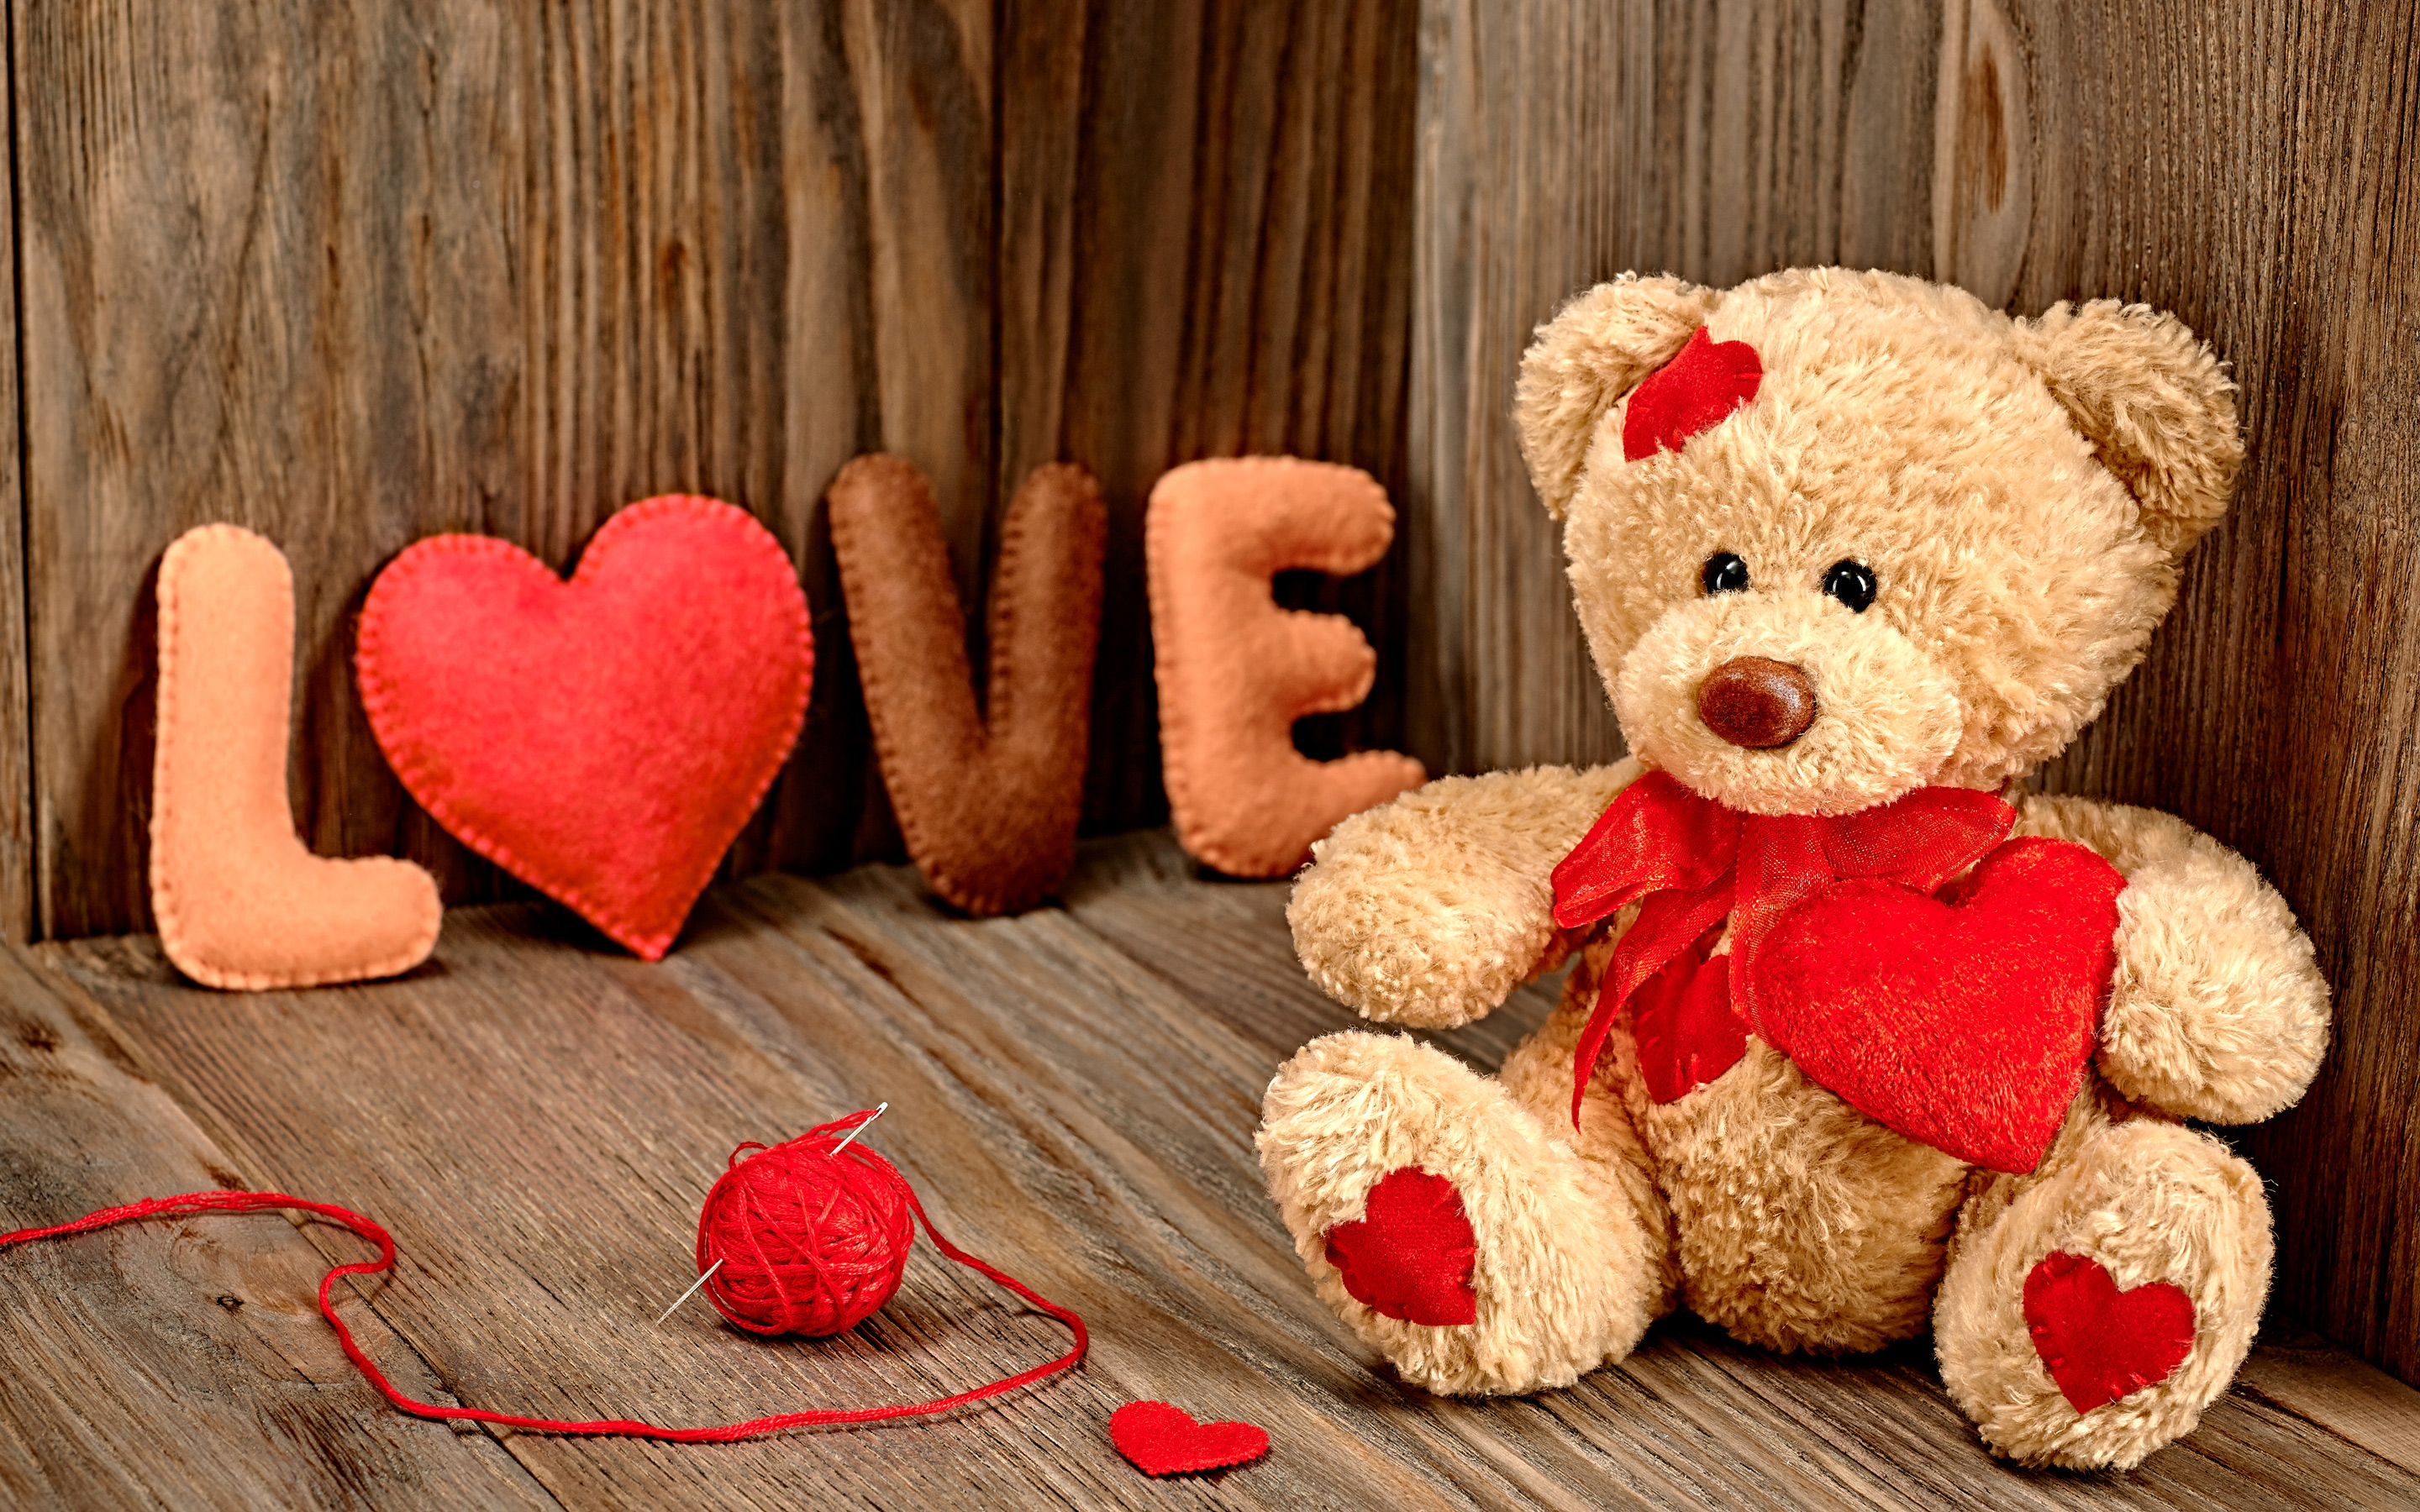 Cute and Romantic Wallpaper with Teddy Bear Picture HD